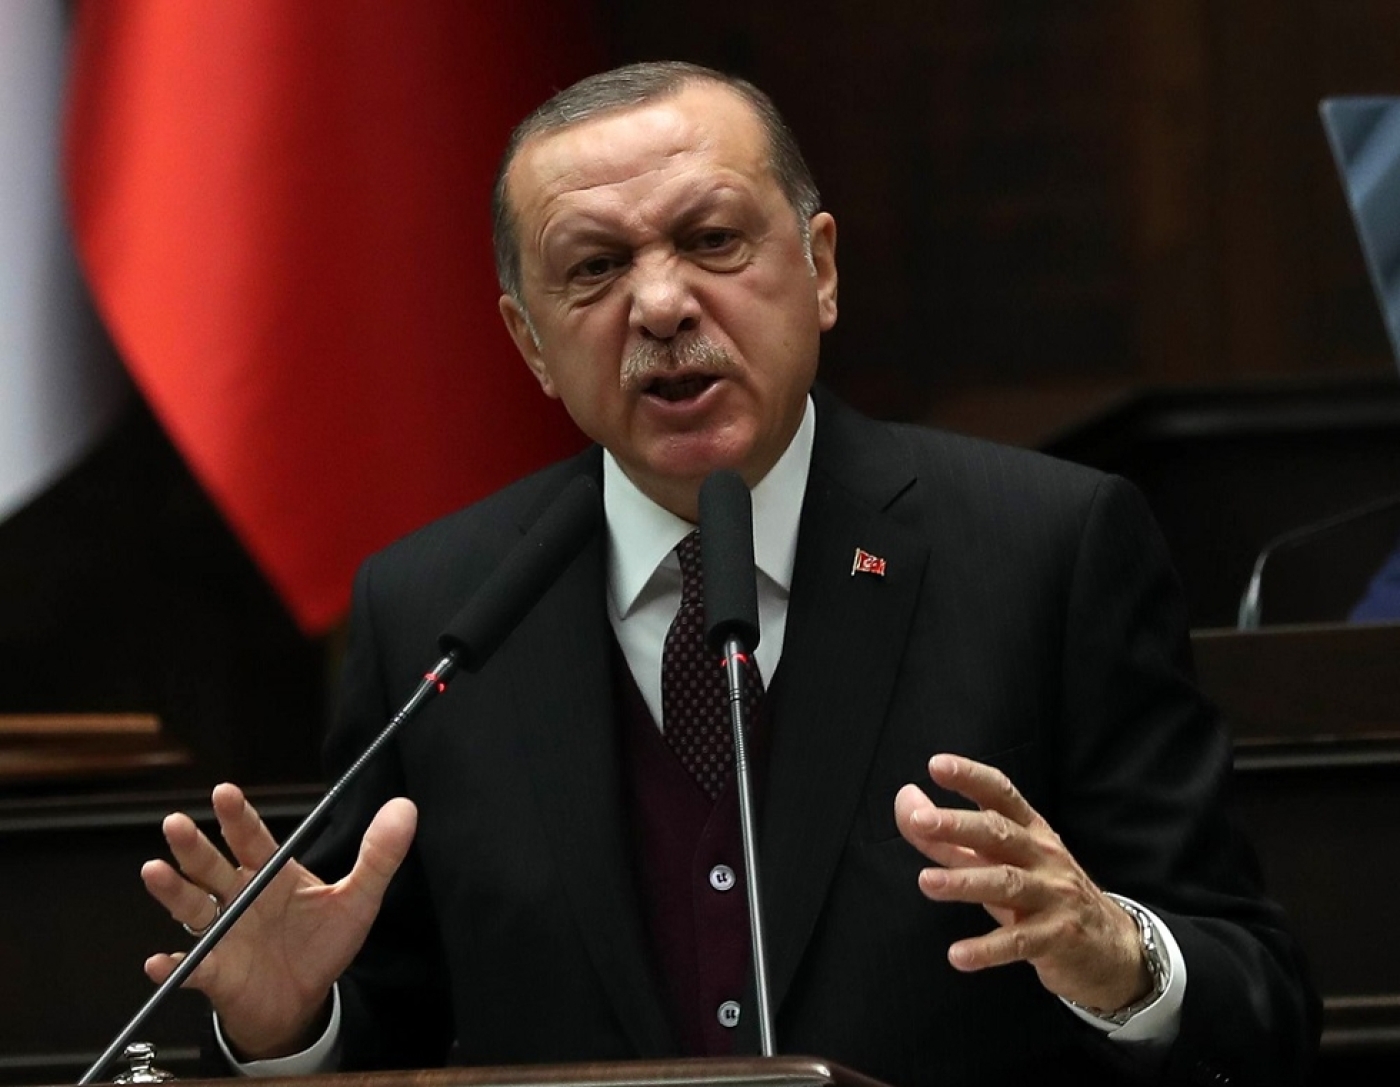 Erdogan vows to strangle US 'terror army' in Syria and invade Kurdish enclave | Middle East Eye